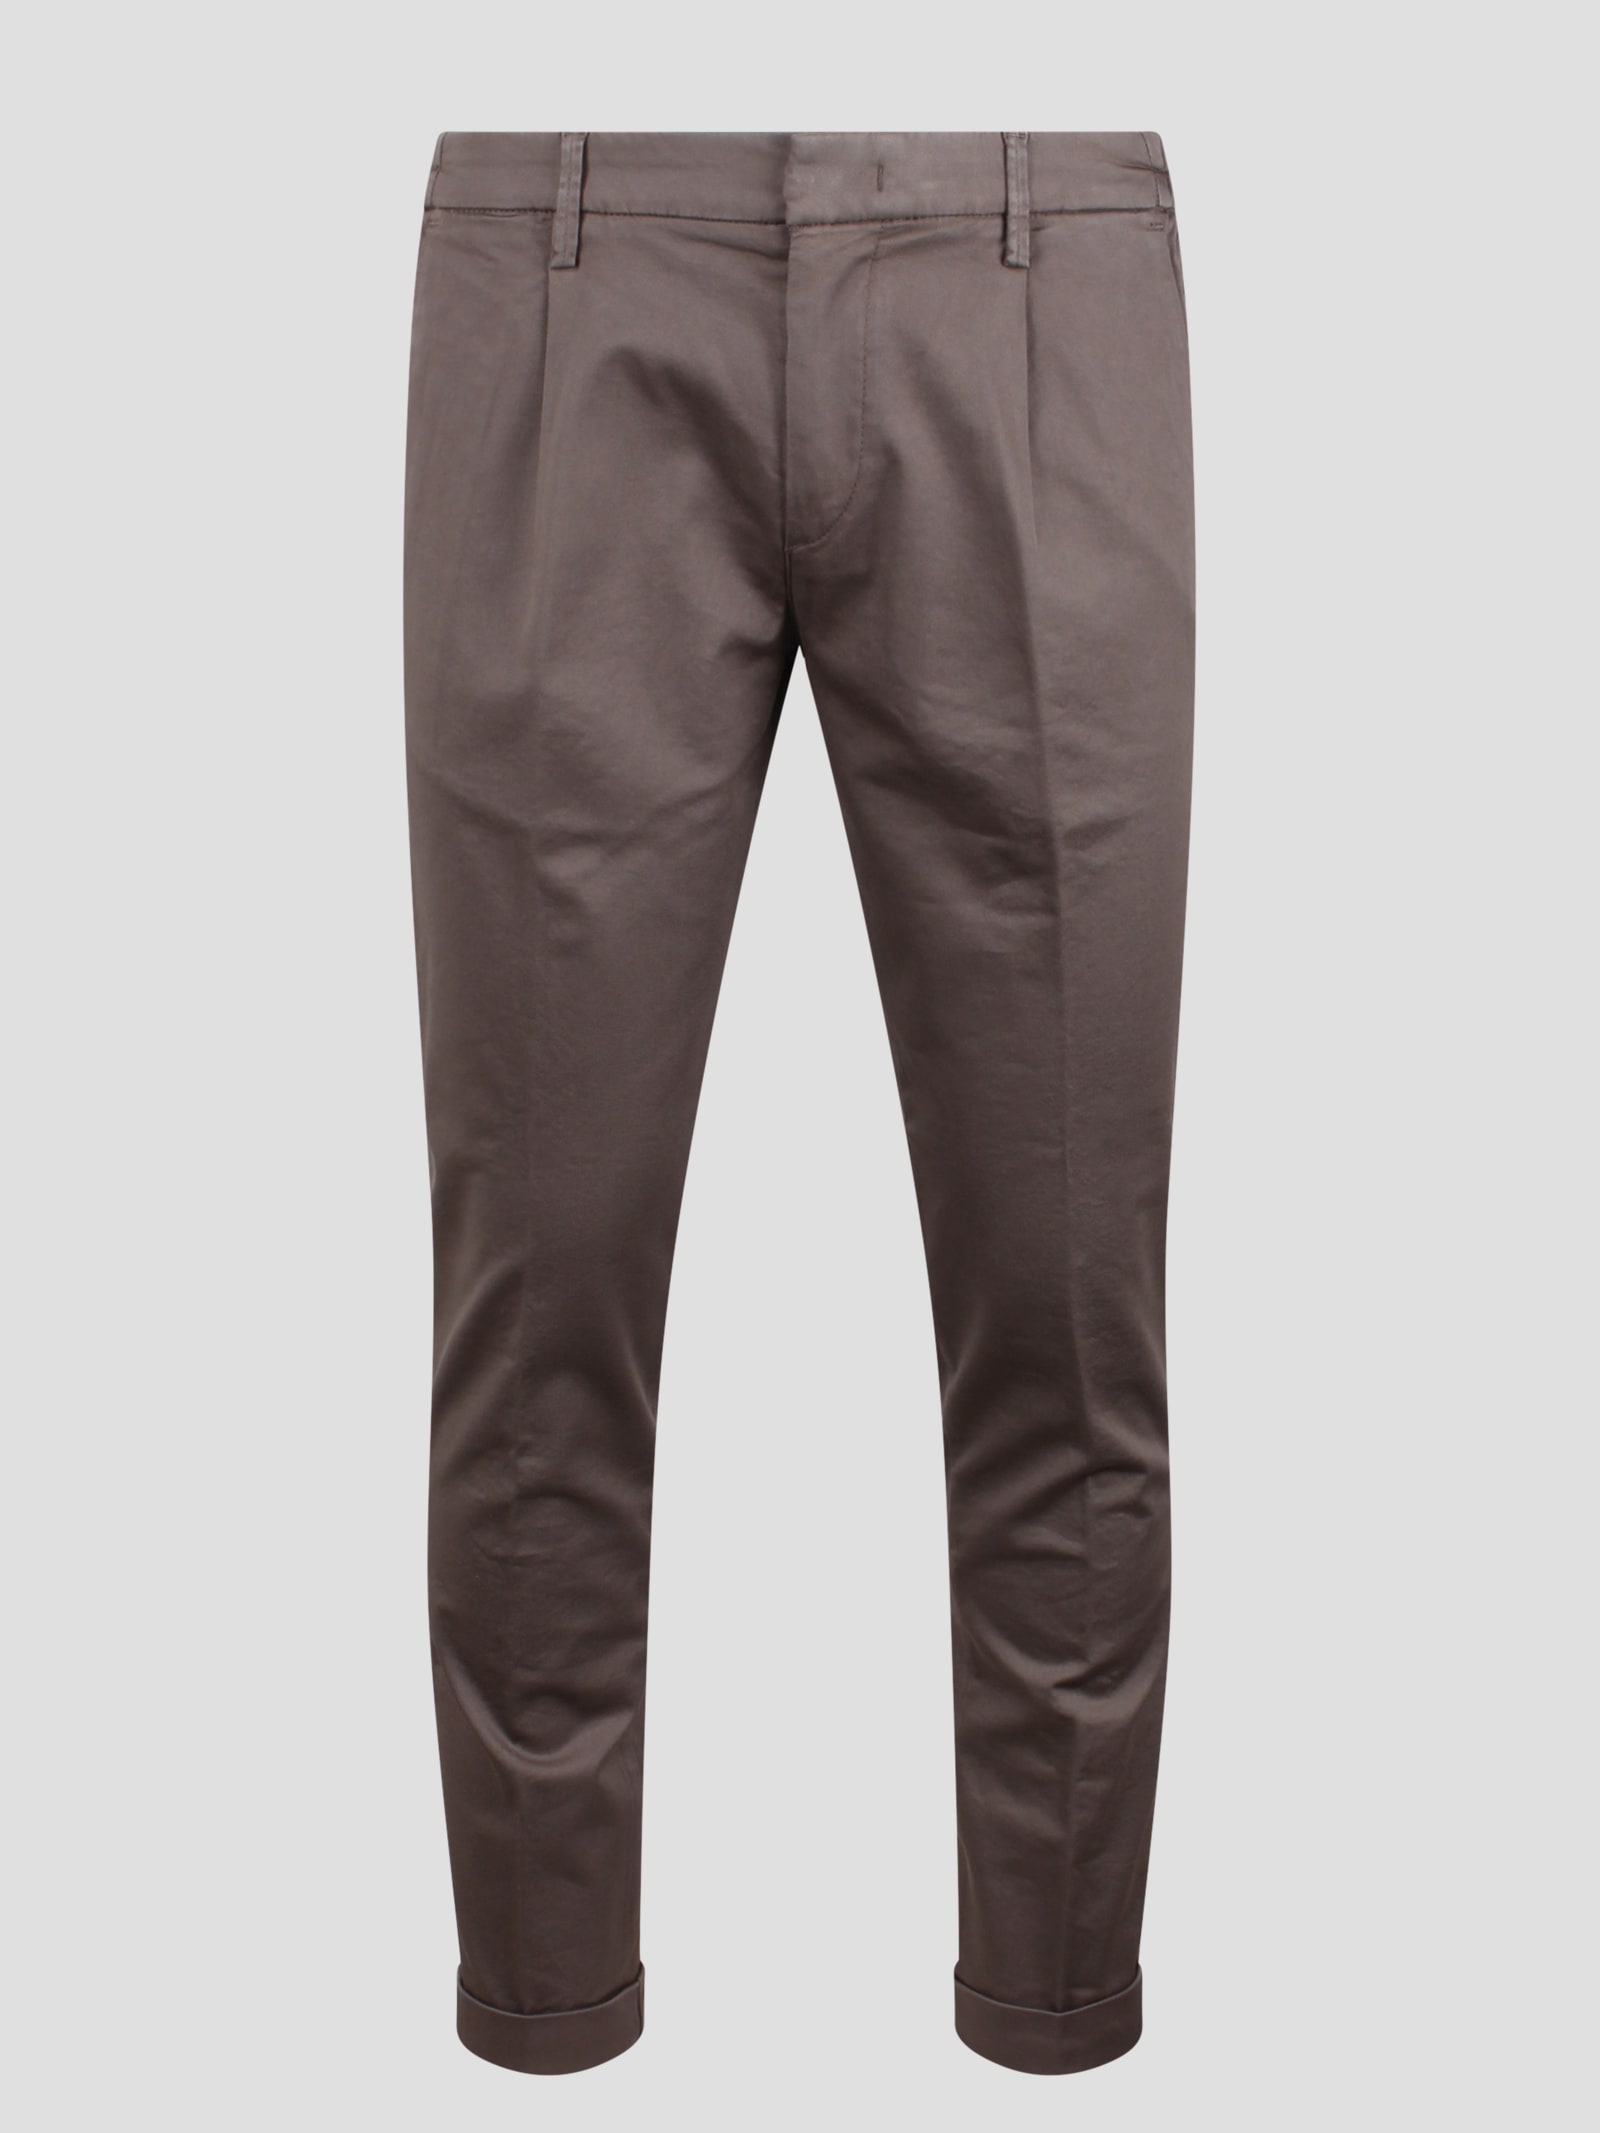 Shop Re-hash Mucha Tp Chino Pant In Nude & Neutrals